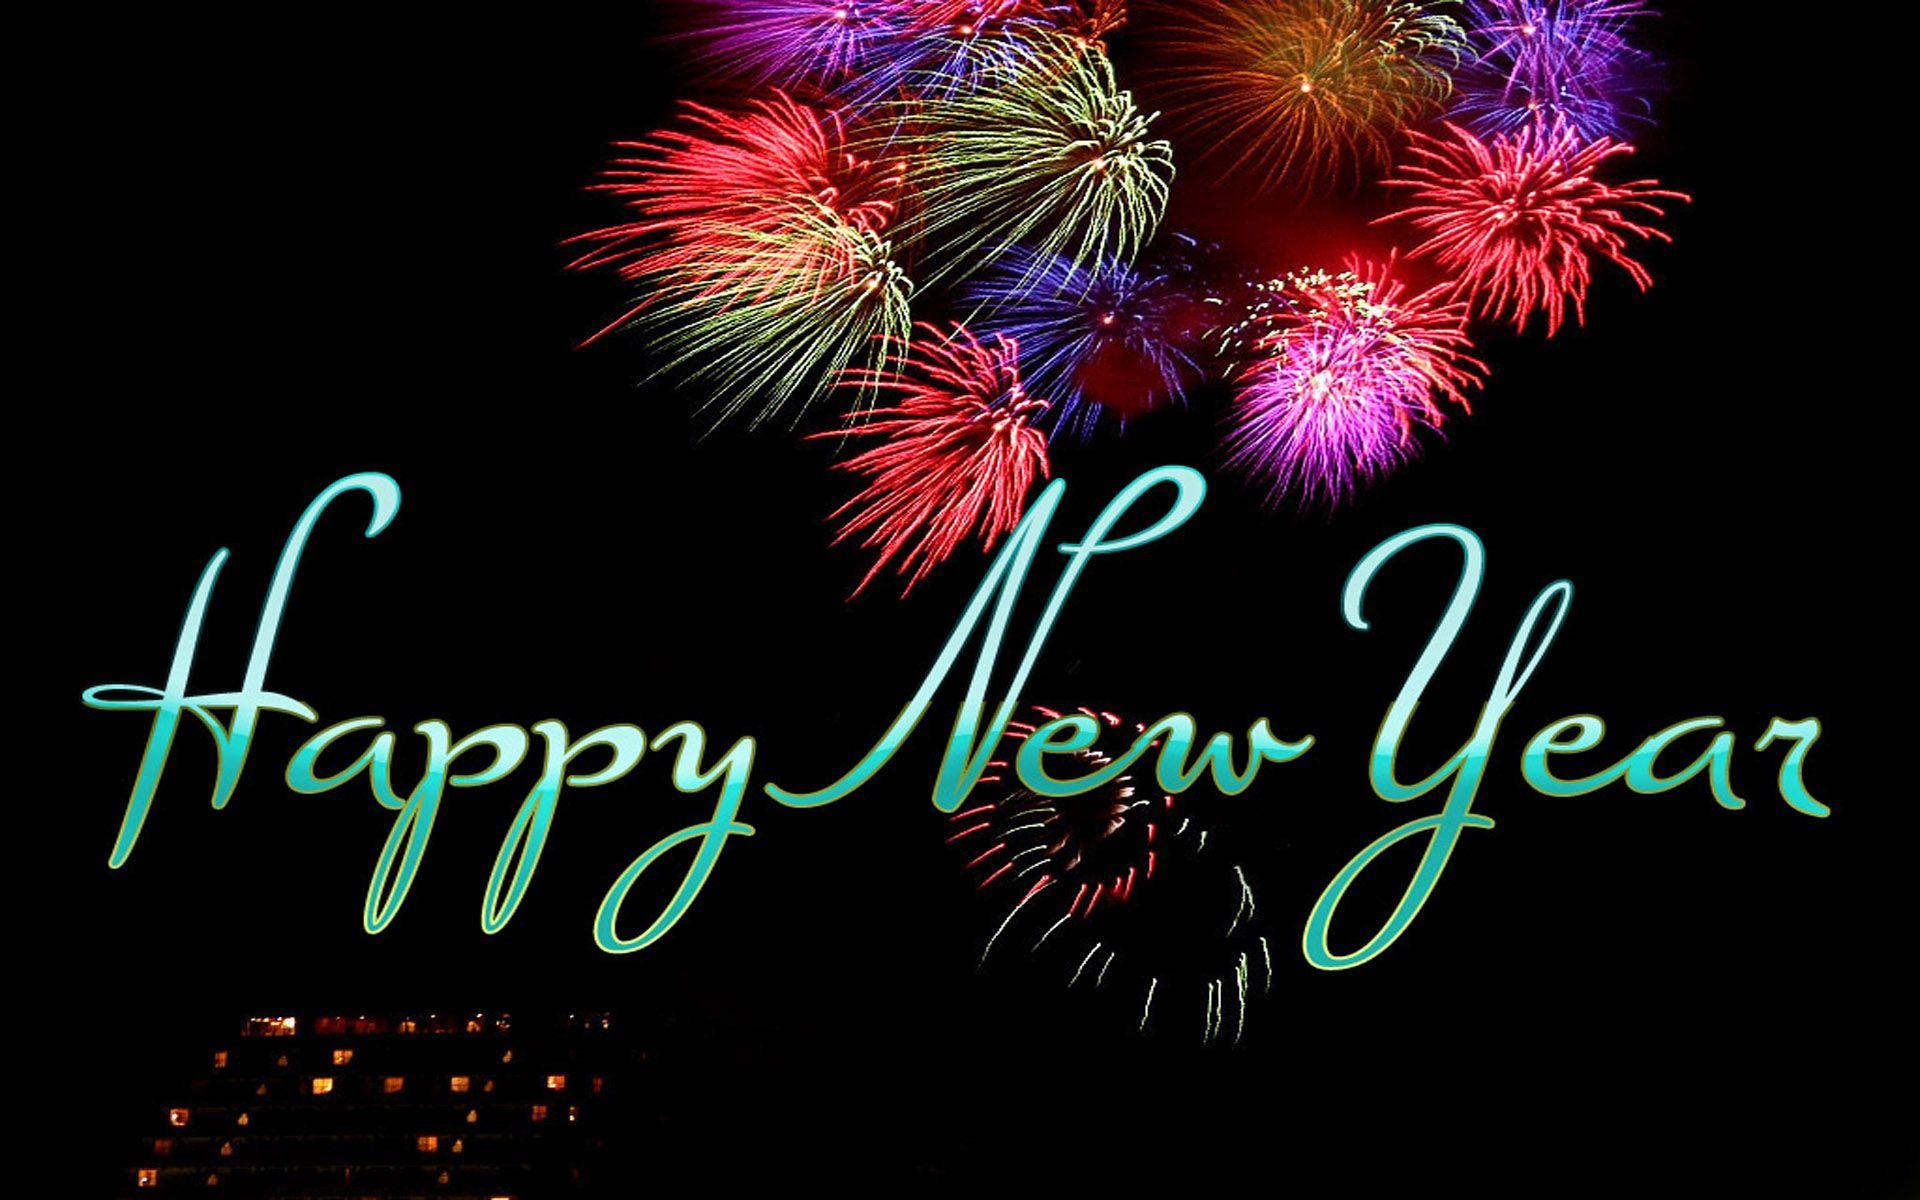 Happy New Year image HD Wallpaper Picture Photo Pics Free